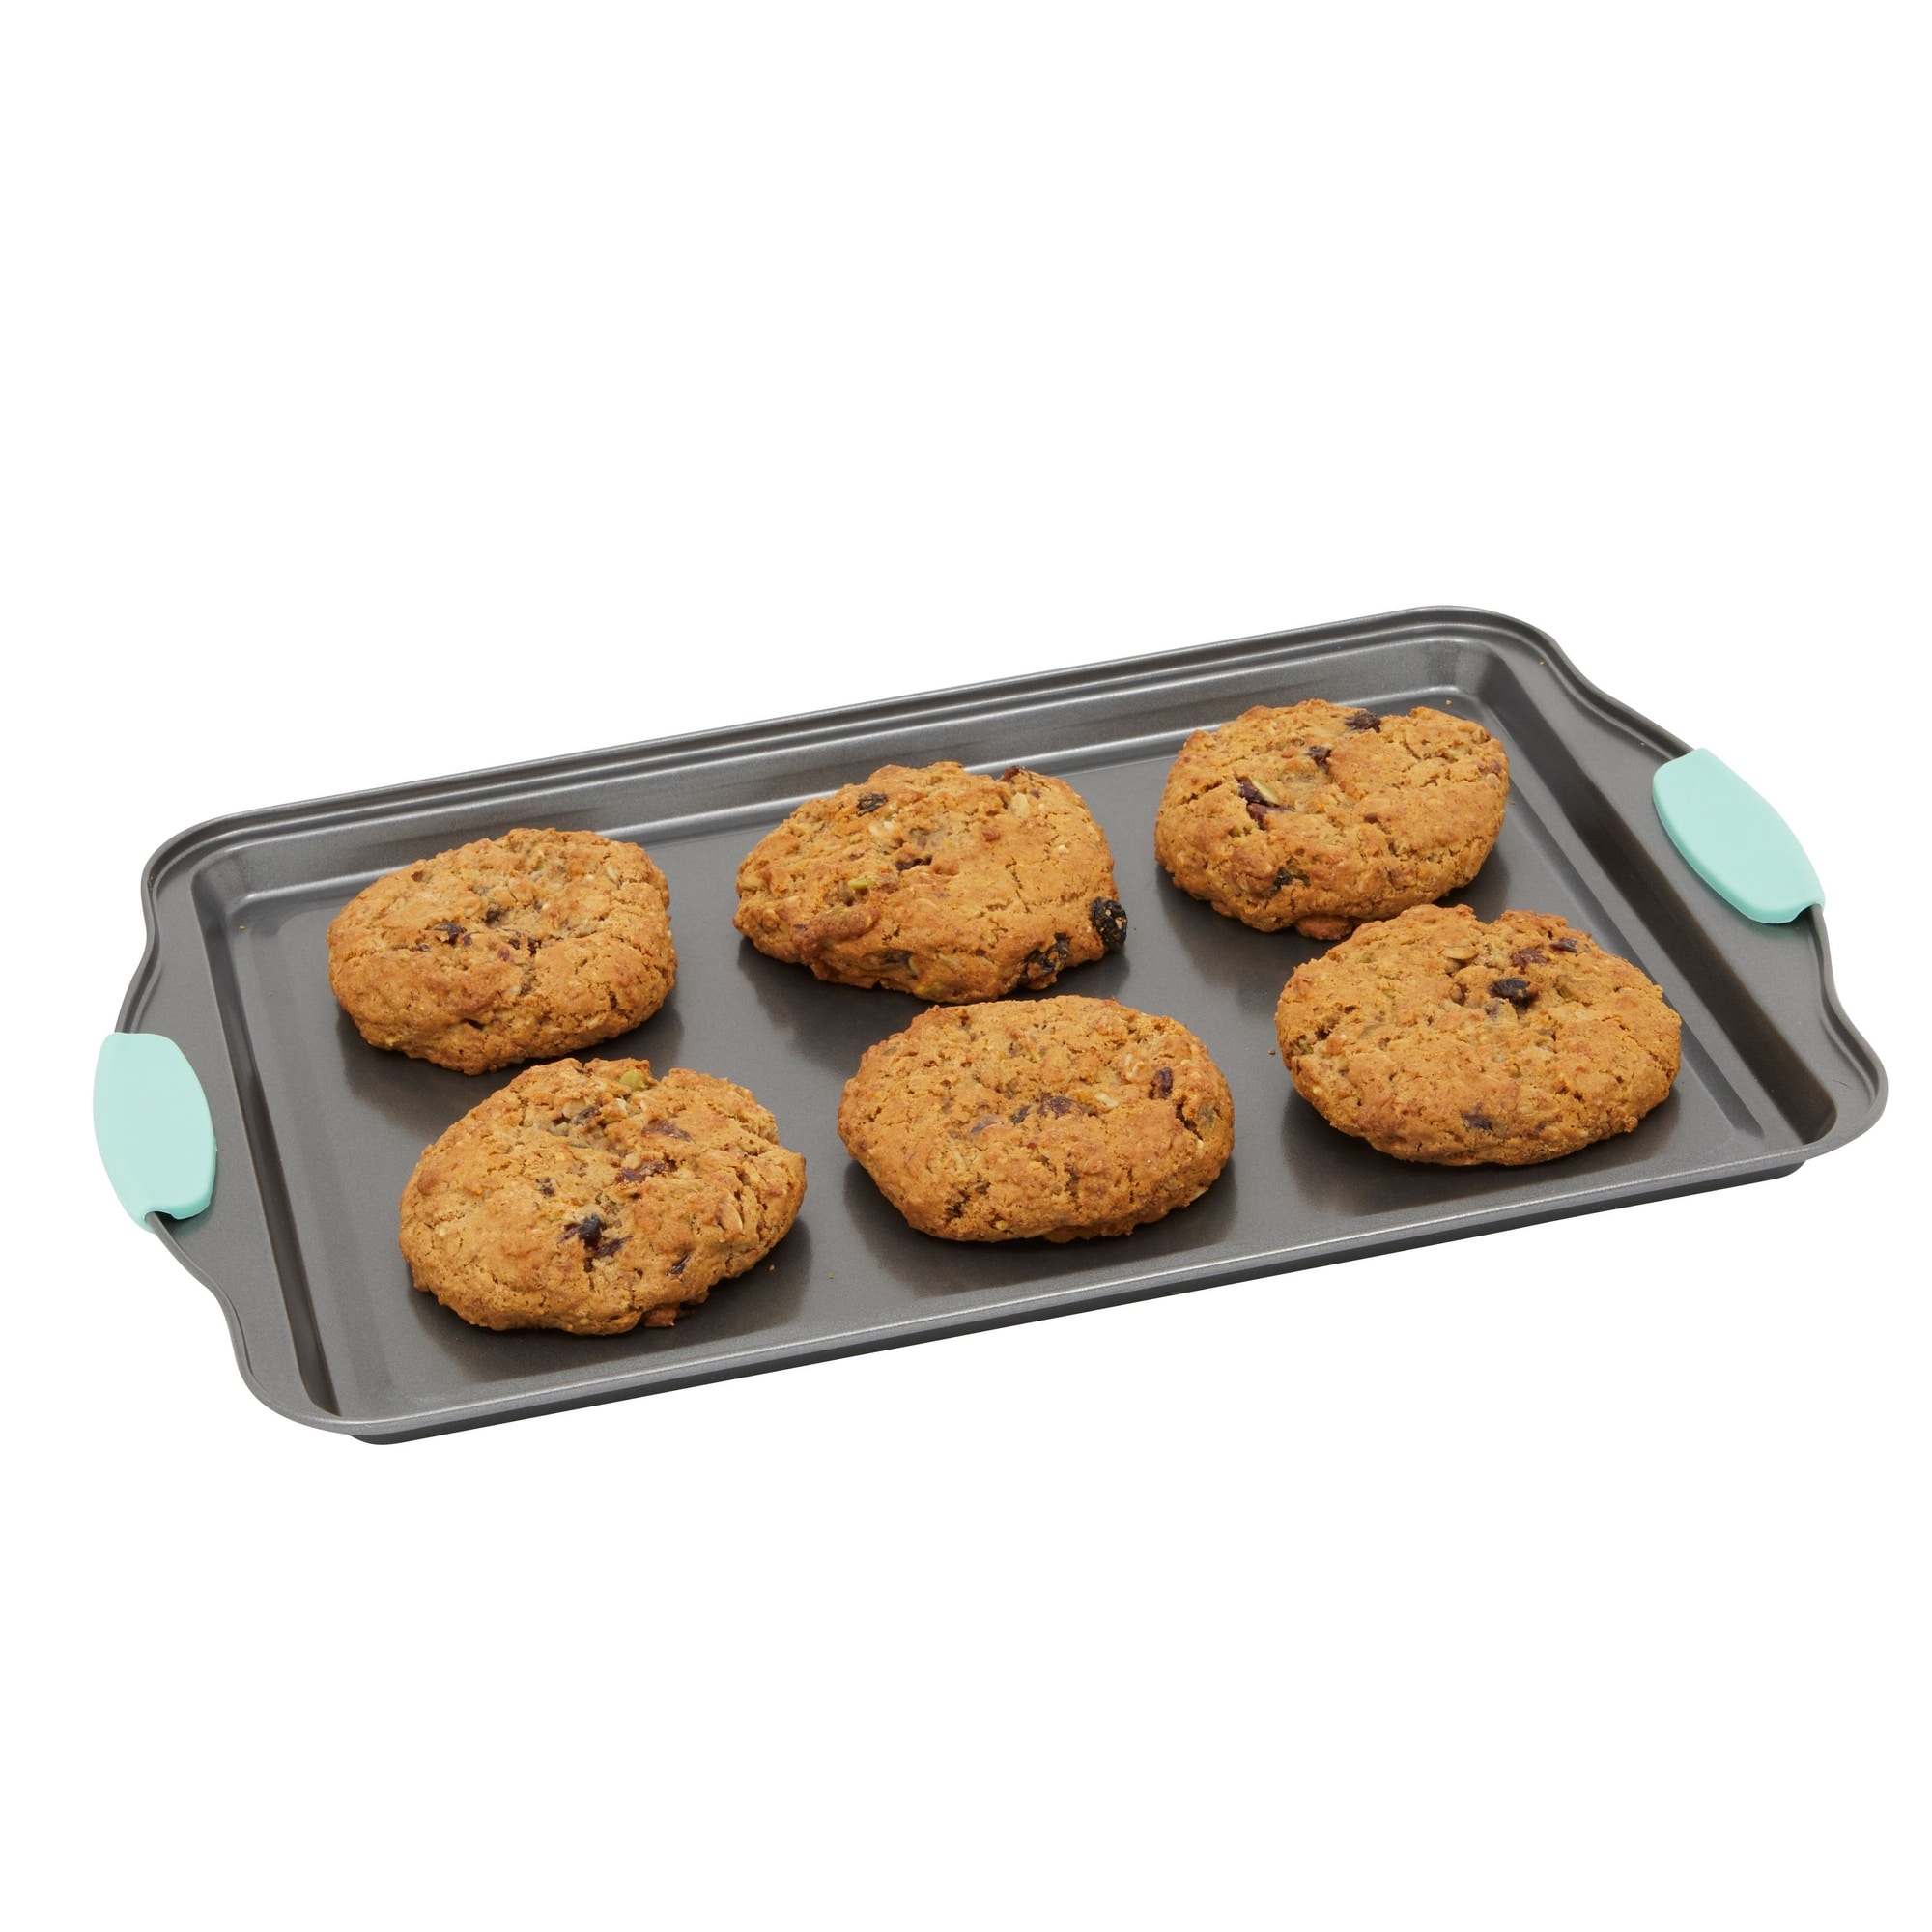 https://ak1.ostkcdn.com/images/products/is/images/direct/f6505052fa4e60684eb50c00482d82f63a78ef5e/Set-of-3-Nonstick-Cookie-Sheets-for-Baking%2C-Bakeware-Pans-with-Silicone-Rubber-Handles-%2810-x-14-Inches%29.jpg